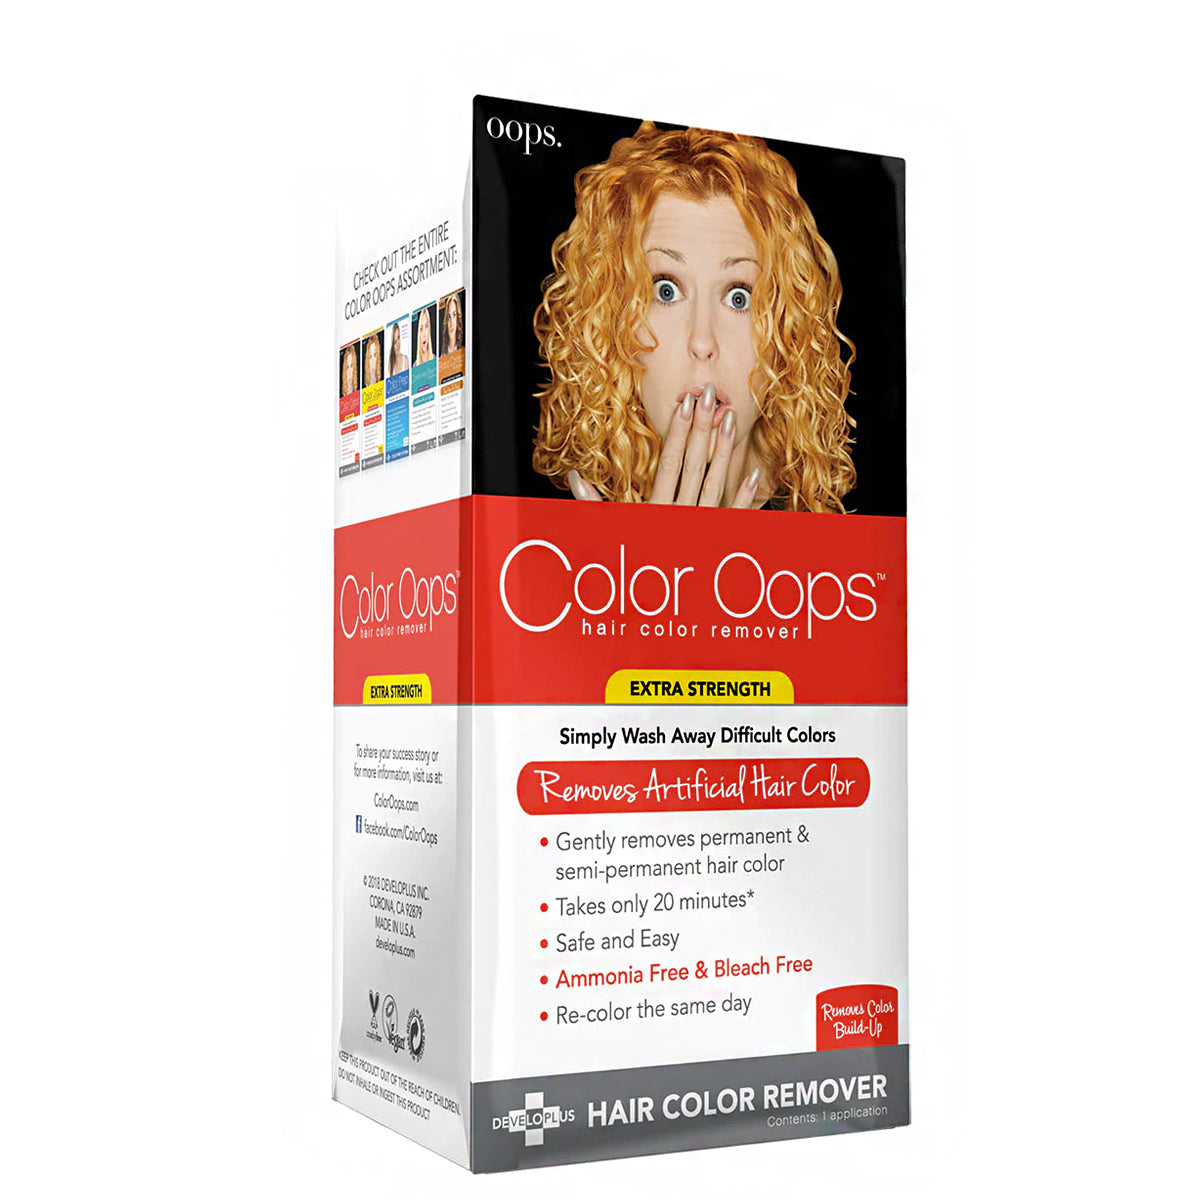 Color Oops Hair Color Remover - Extra Strength